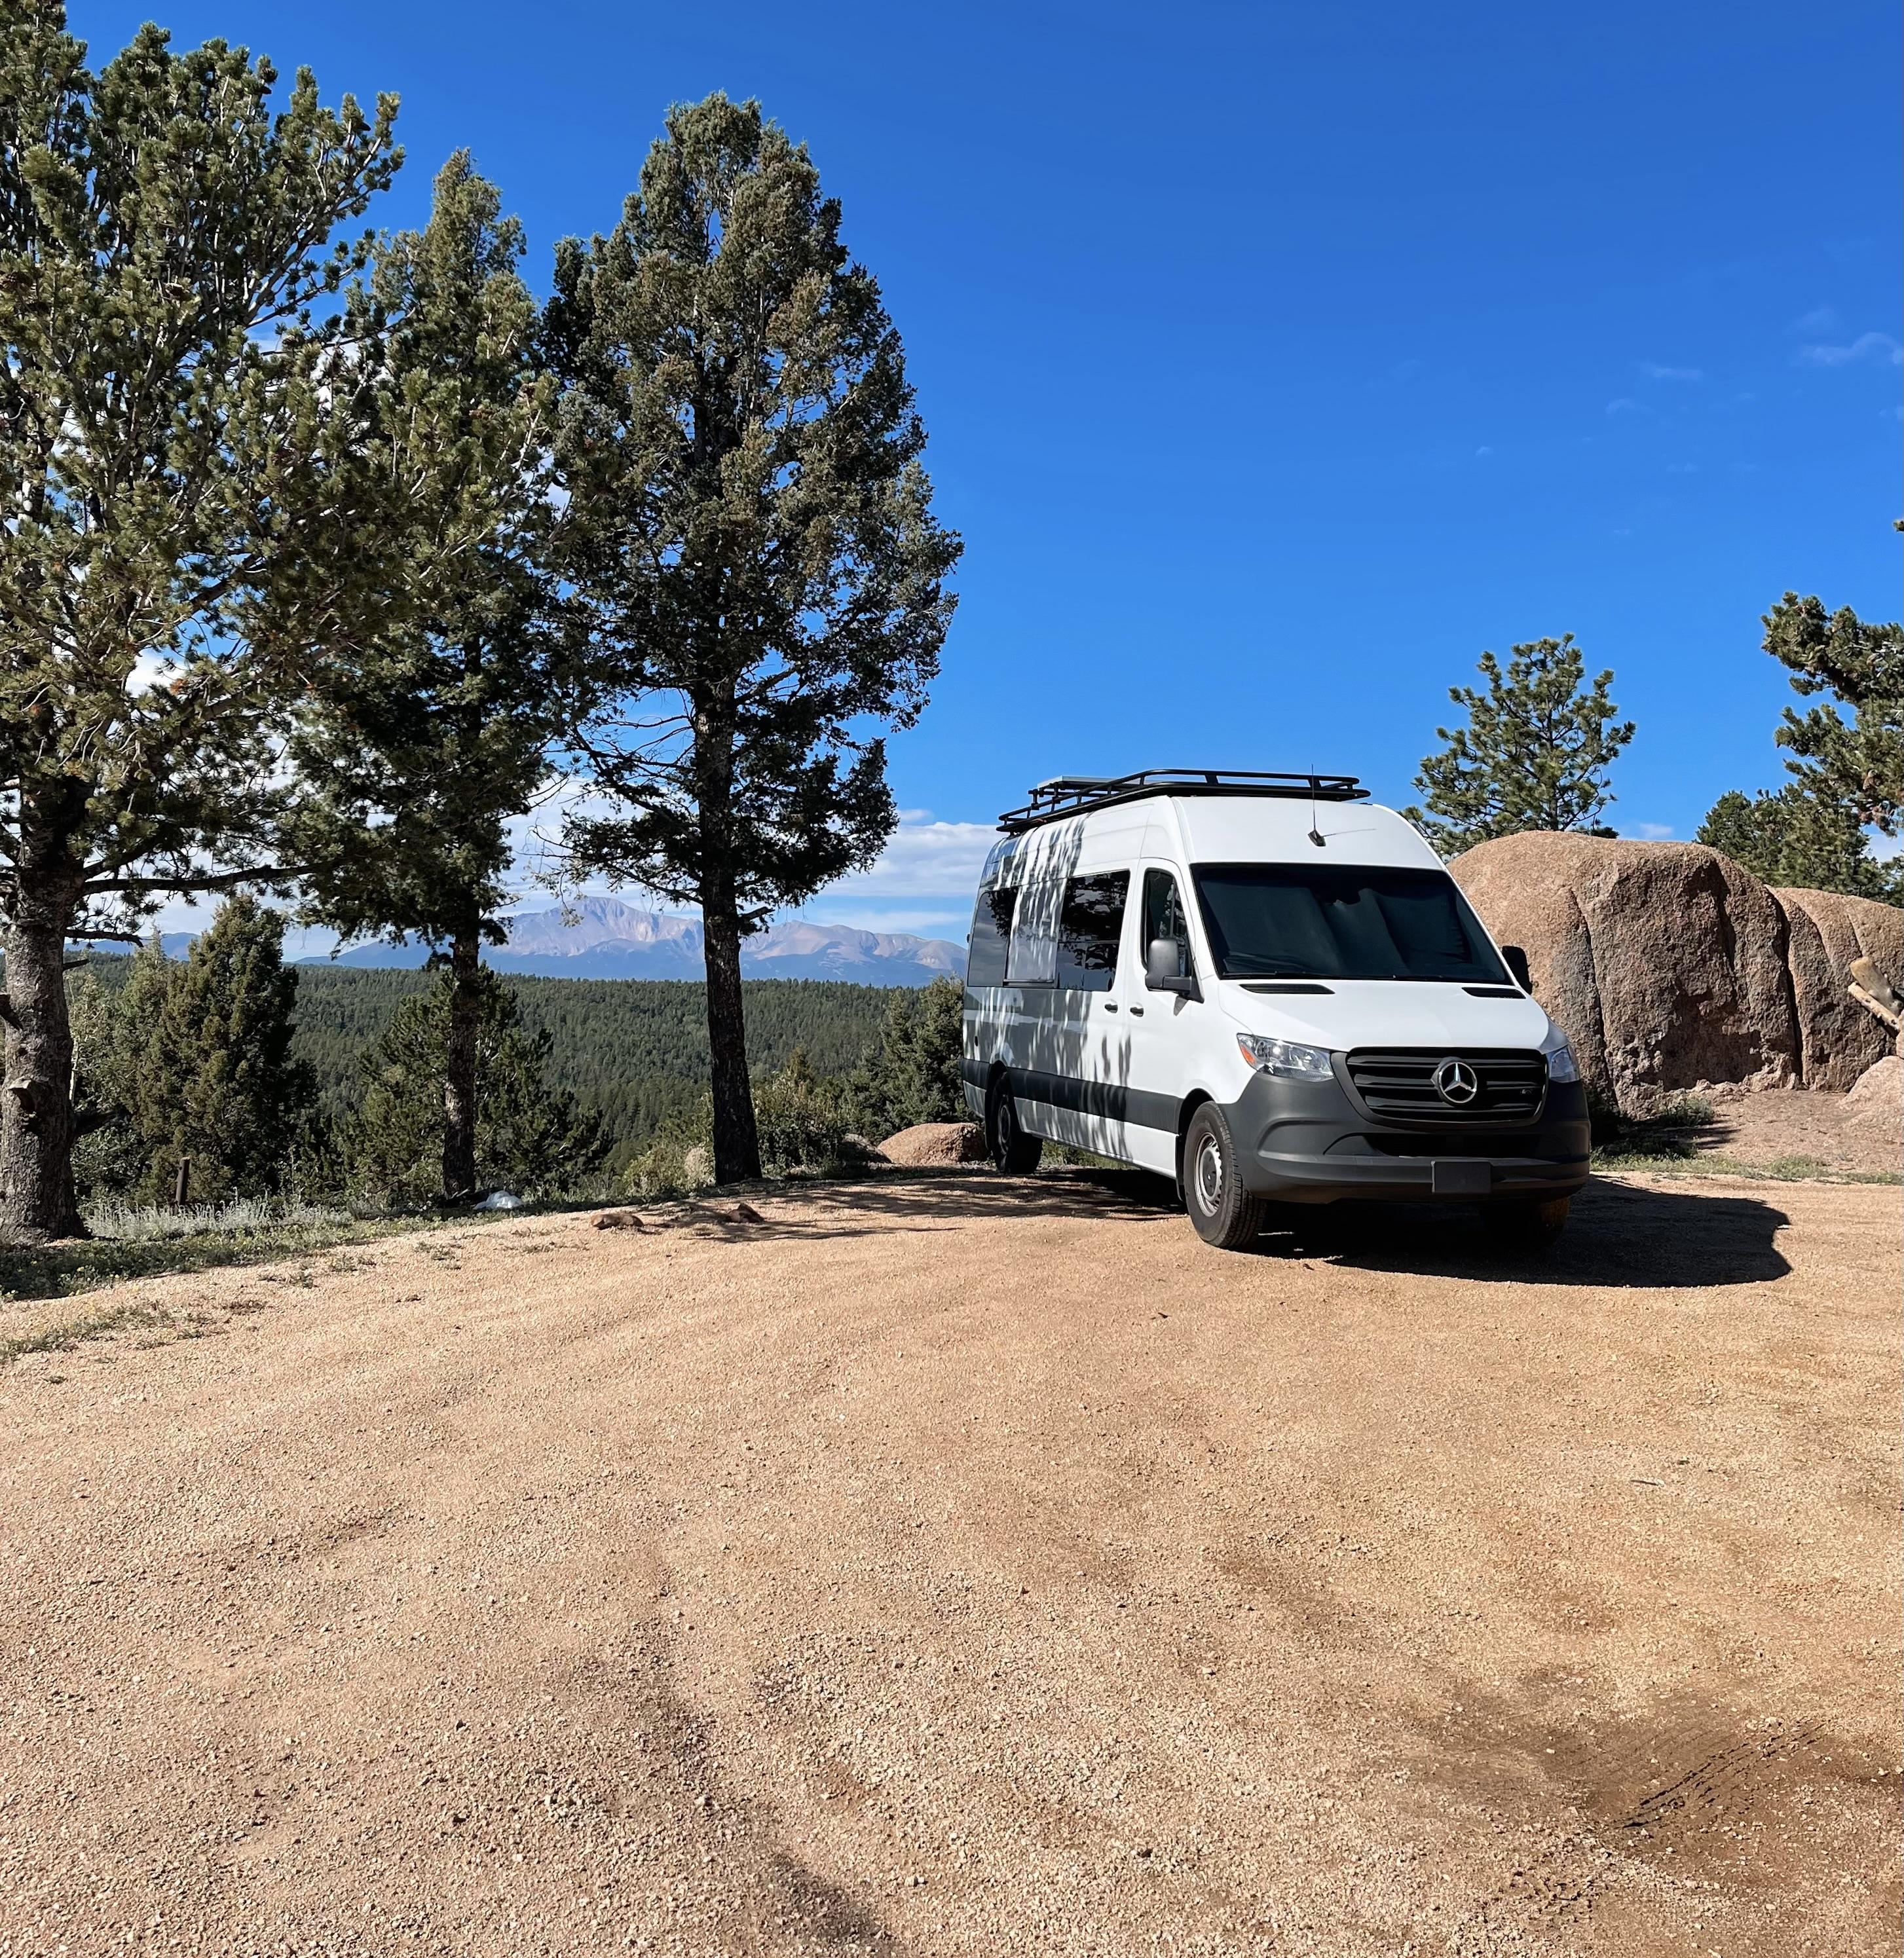 Vanlife Budgeting: How to live cheaply on the road